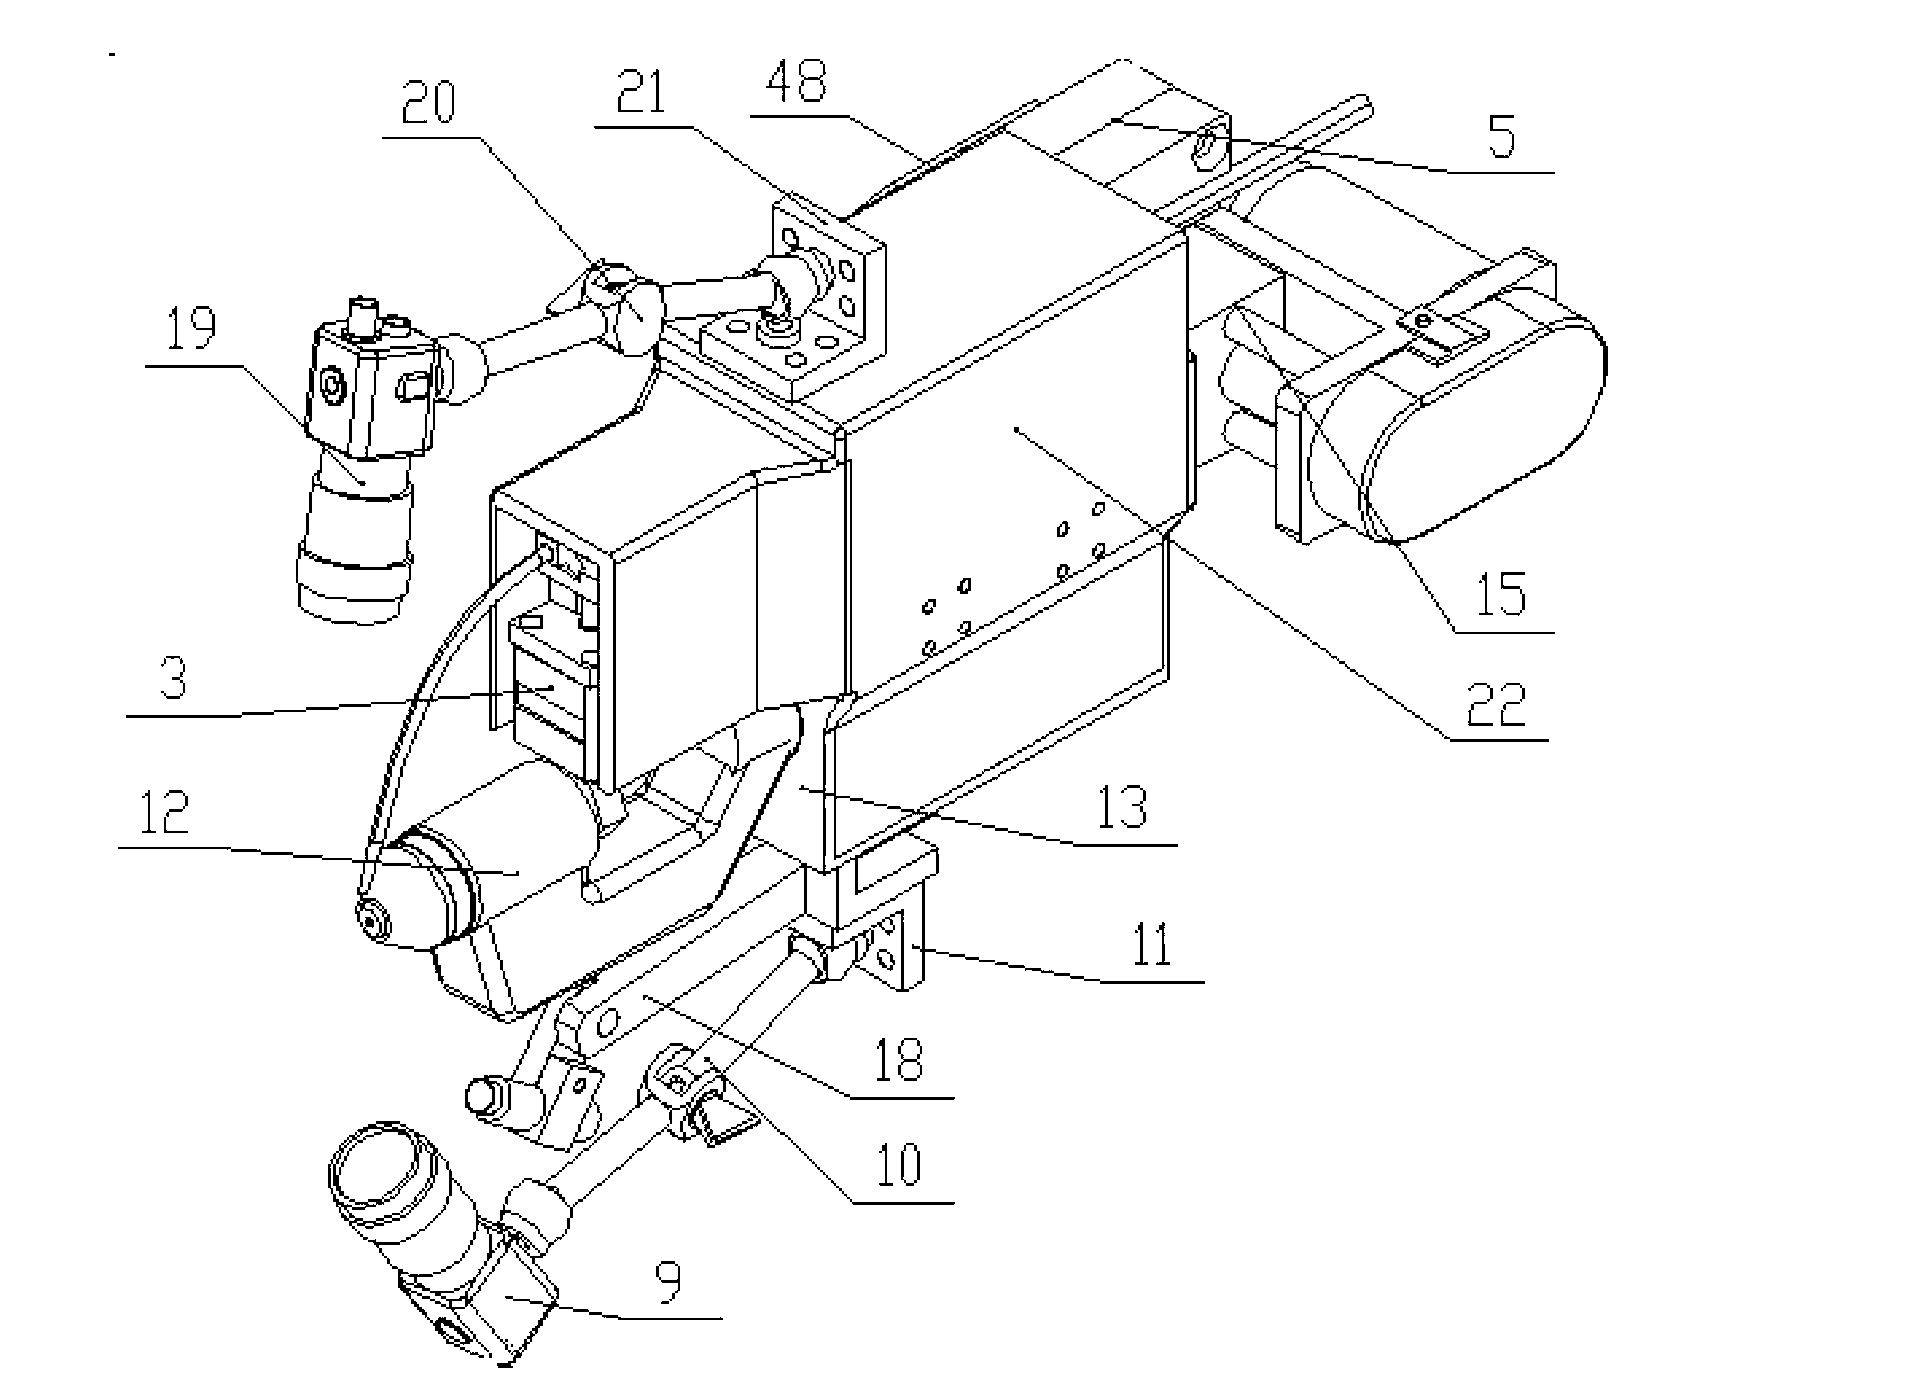 Method and device for controlling welding process based on stability of perforated molten bath